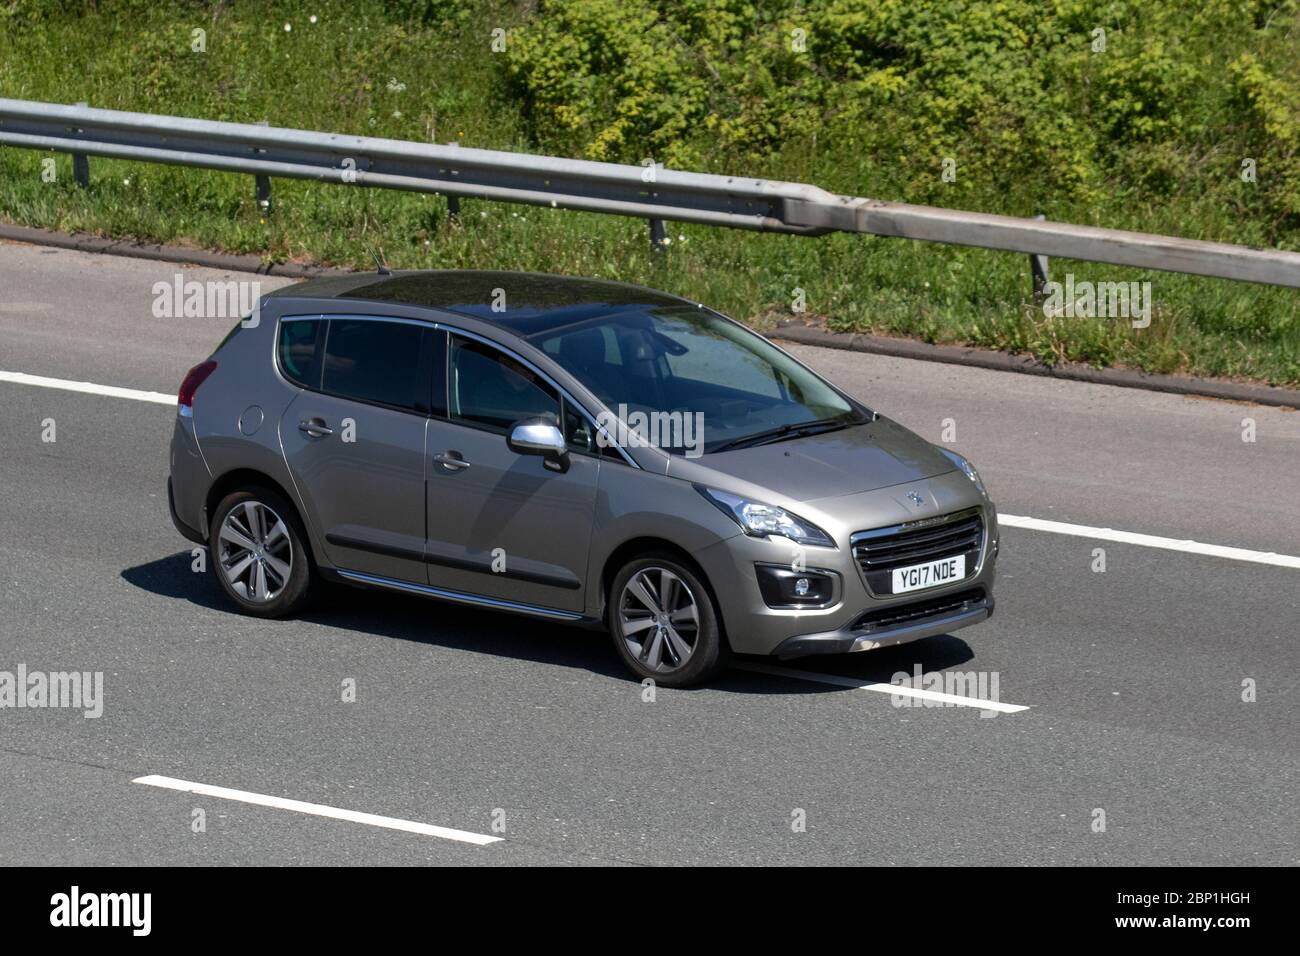 2017 grey Peugeot 3008 Allure Blue HDI S/S; Vehicular traffic moving vehicles, driving vehicle on UK roads, motors, motoring on the M6 motorway highway Stock Photo